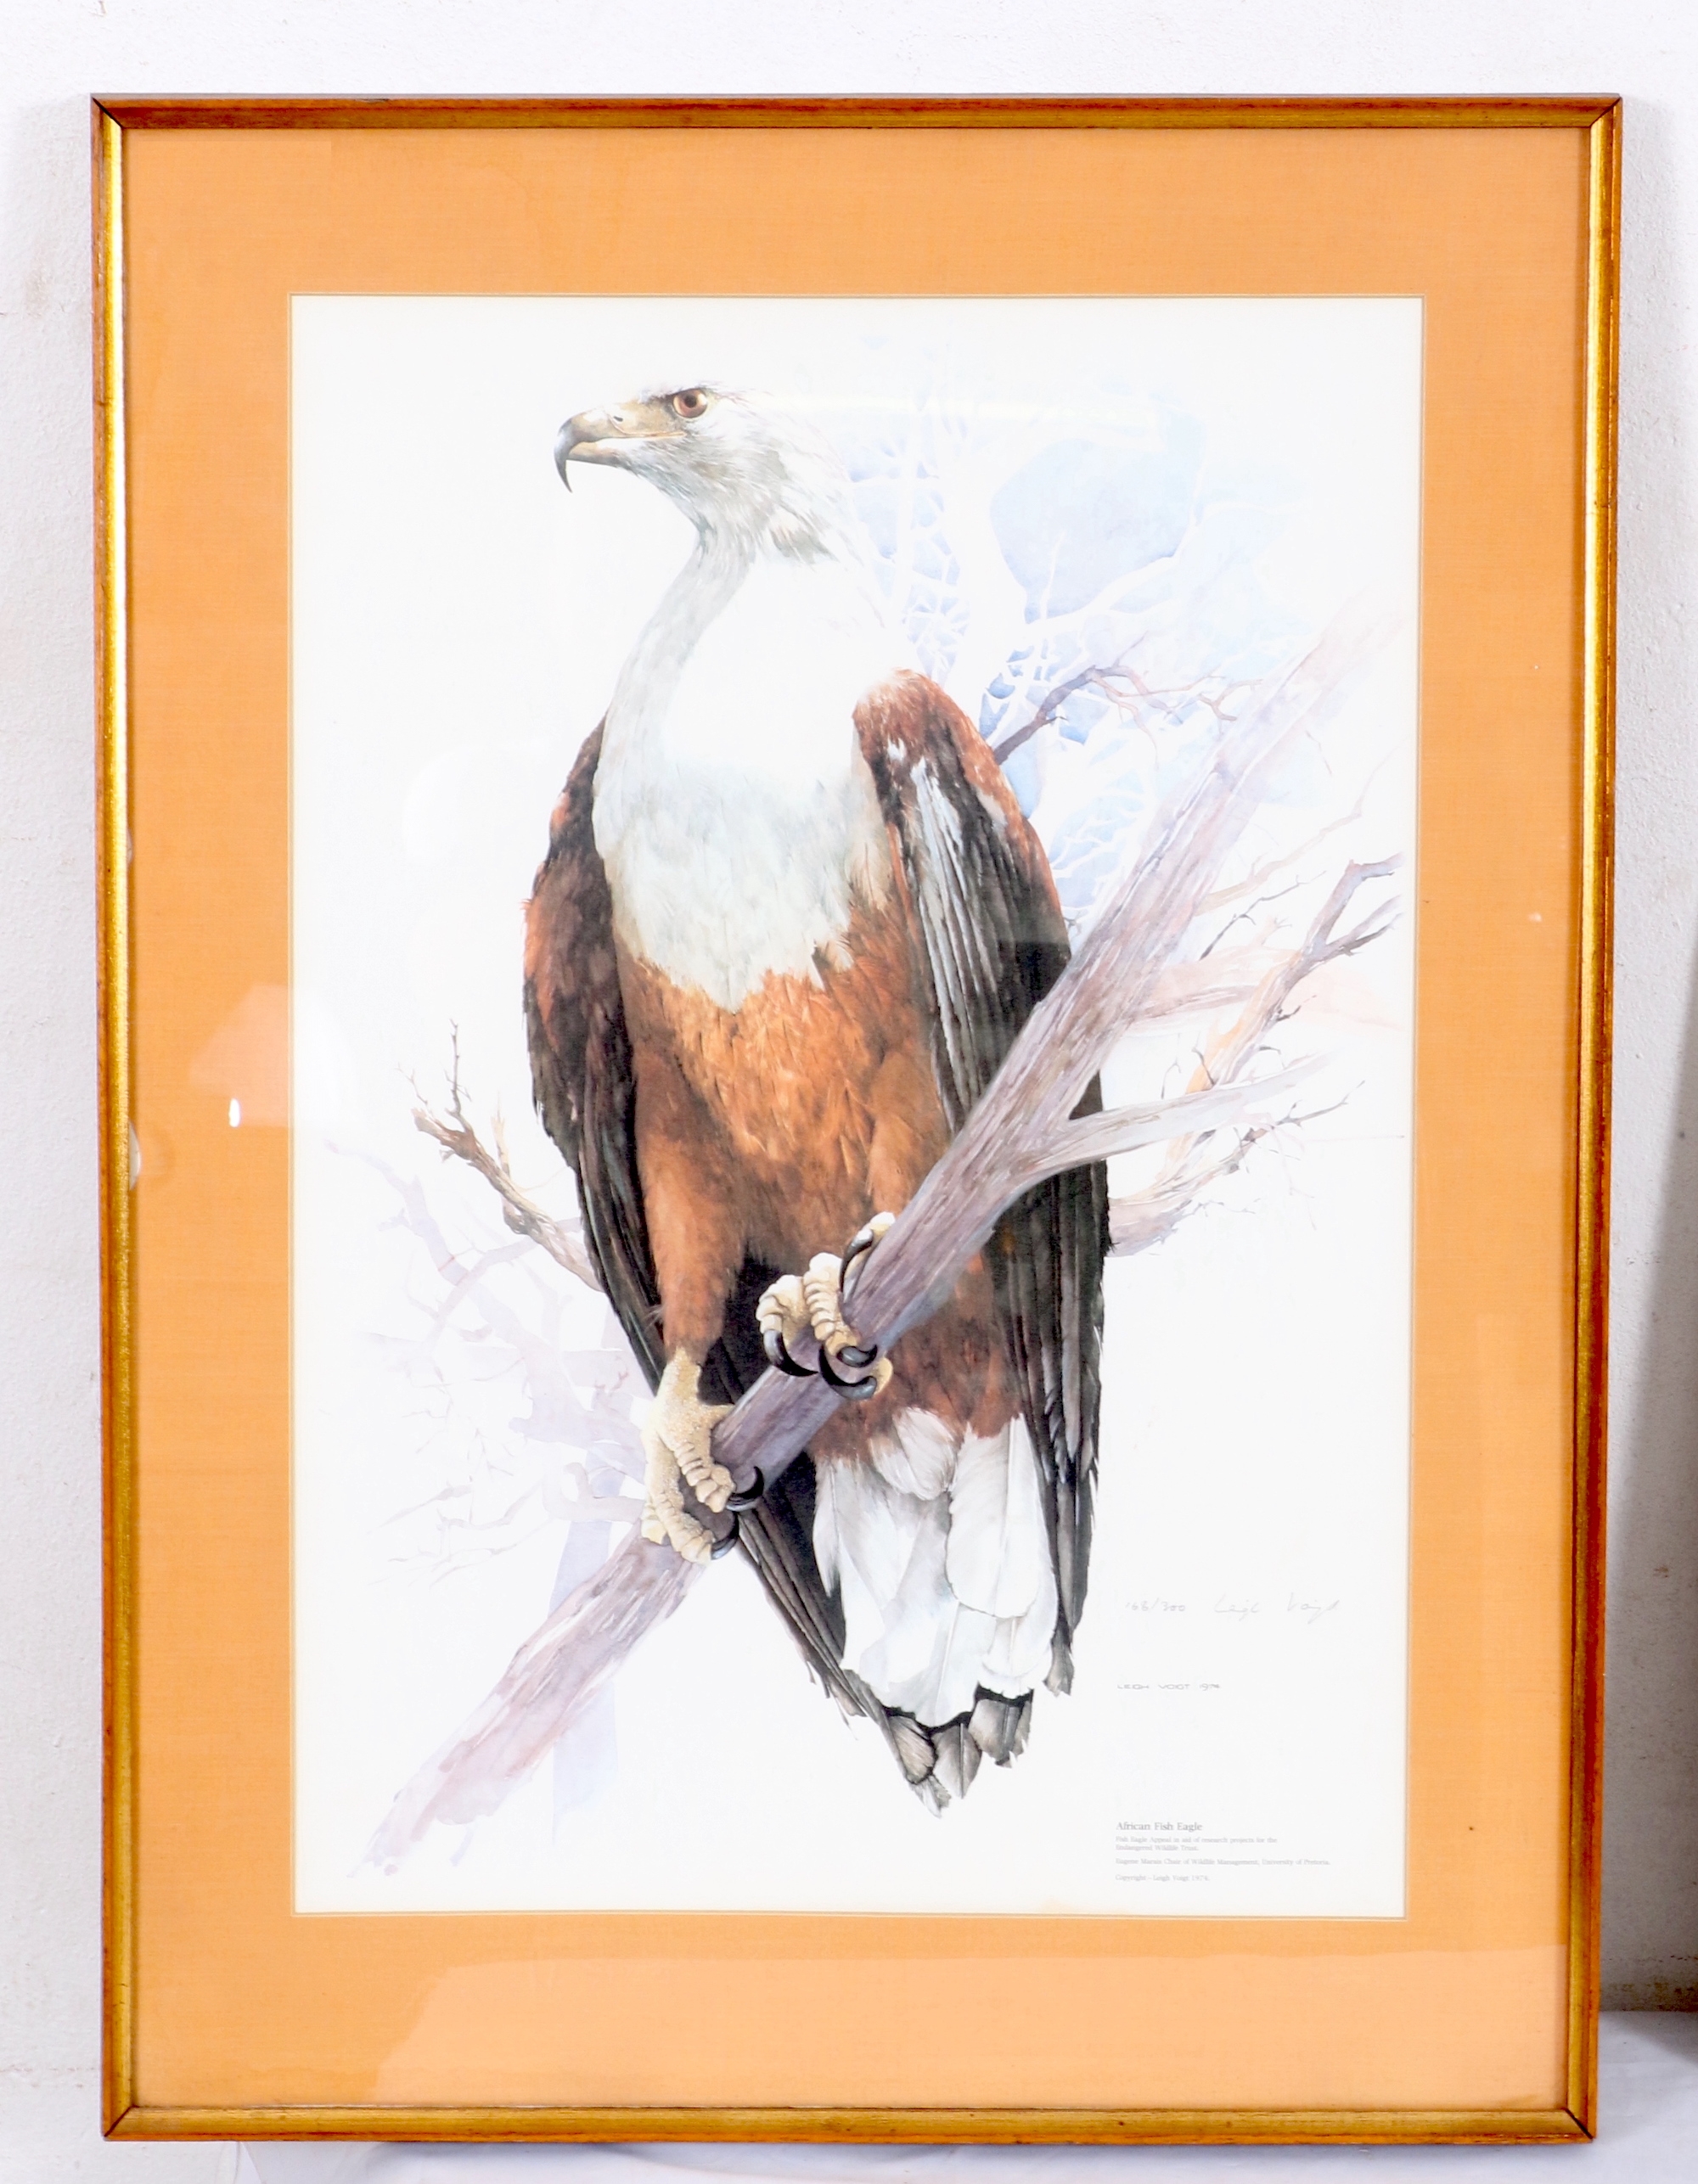 Artwork by Leigh Voigt, AFRICAN FISH EAGLE, Made of photolithograph